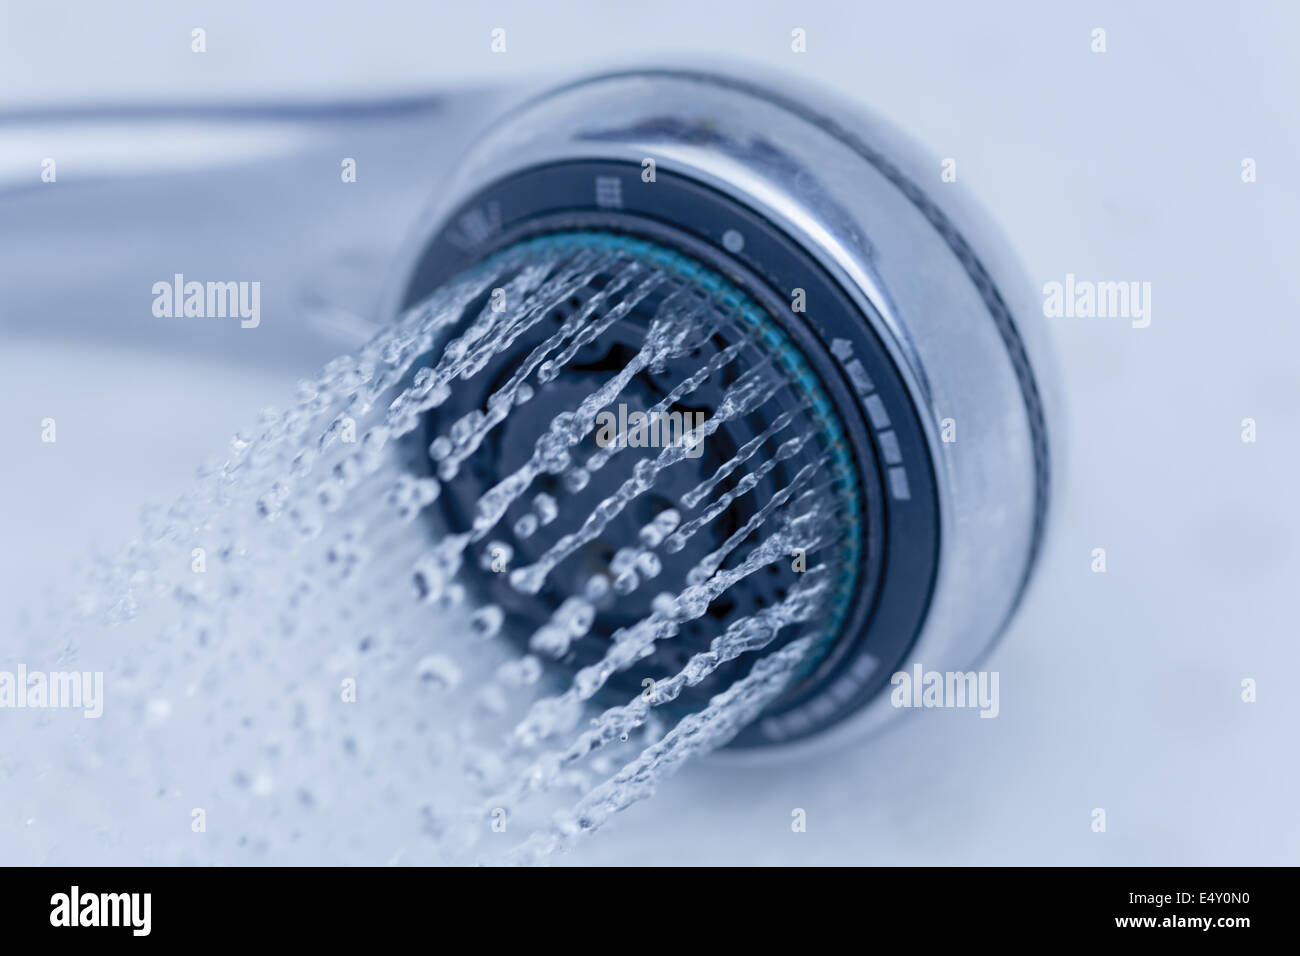 Shower and flying water drops. Stock Photo